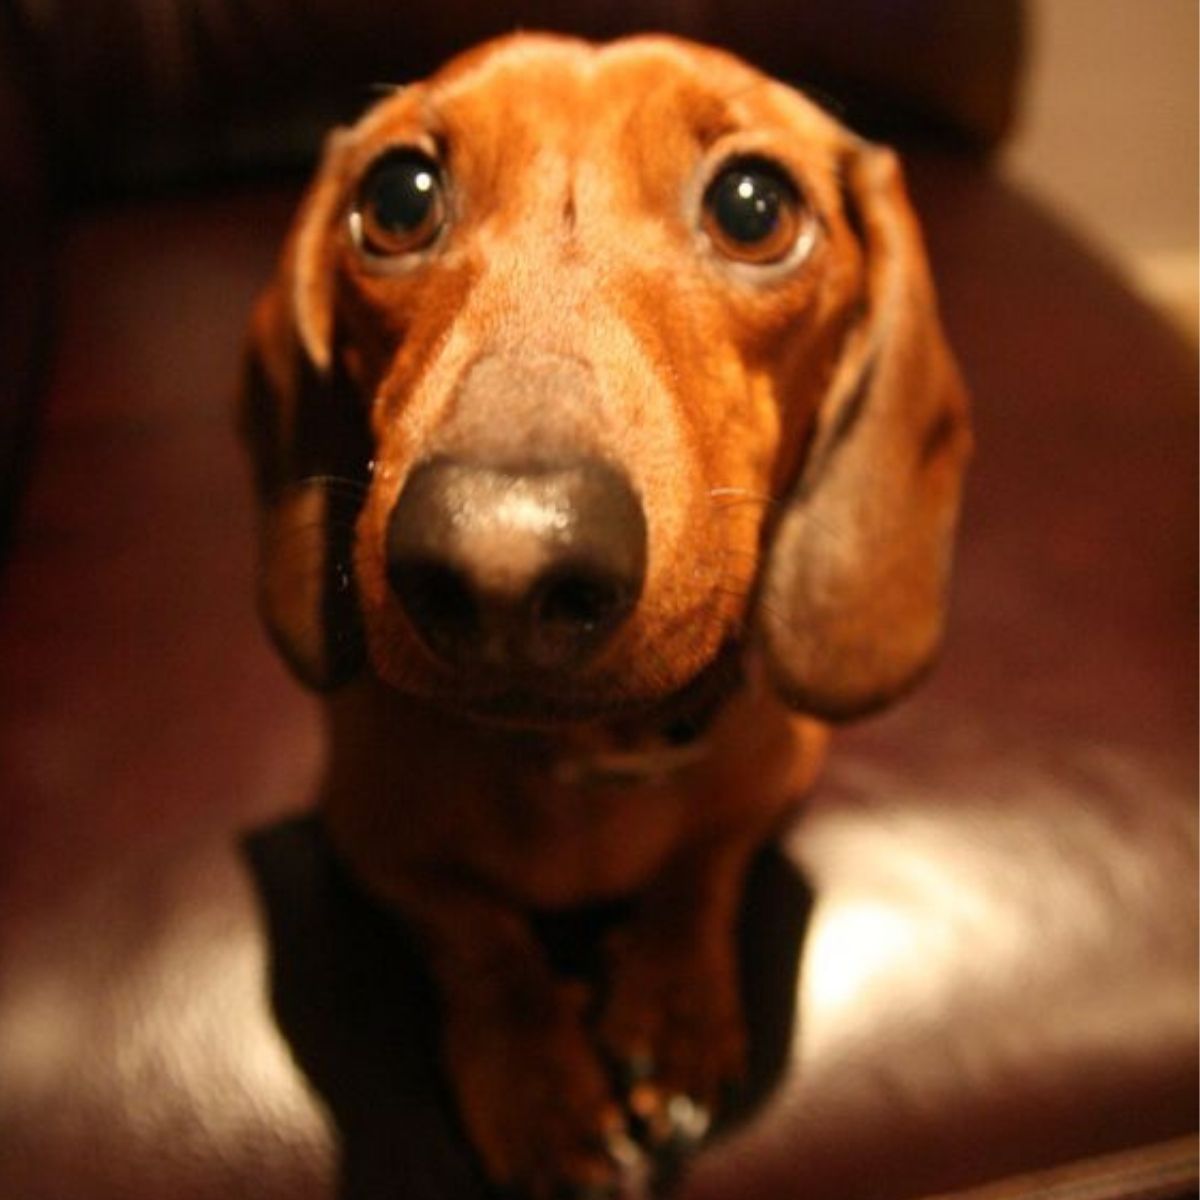 25 Funny Pics Of Dachshunds Begging For Food - The Paws